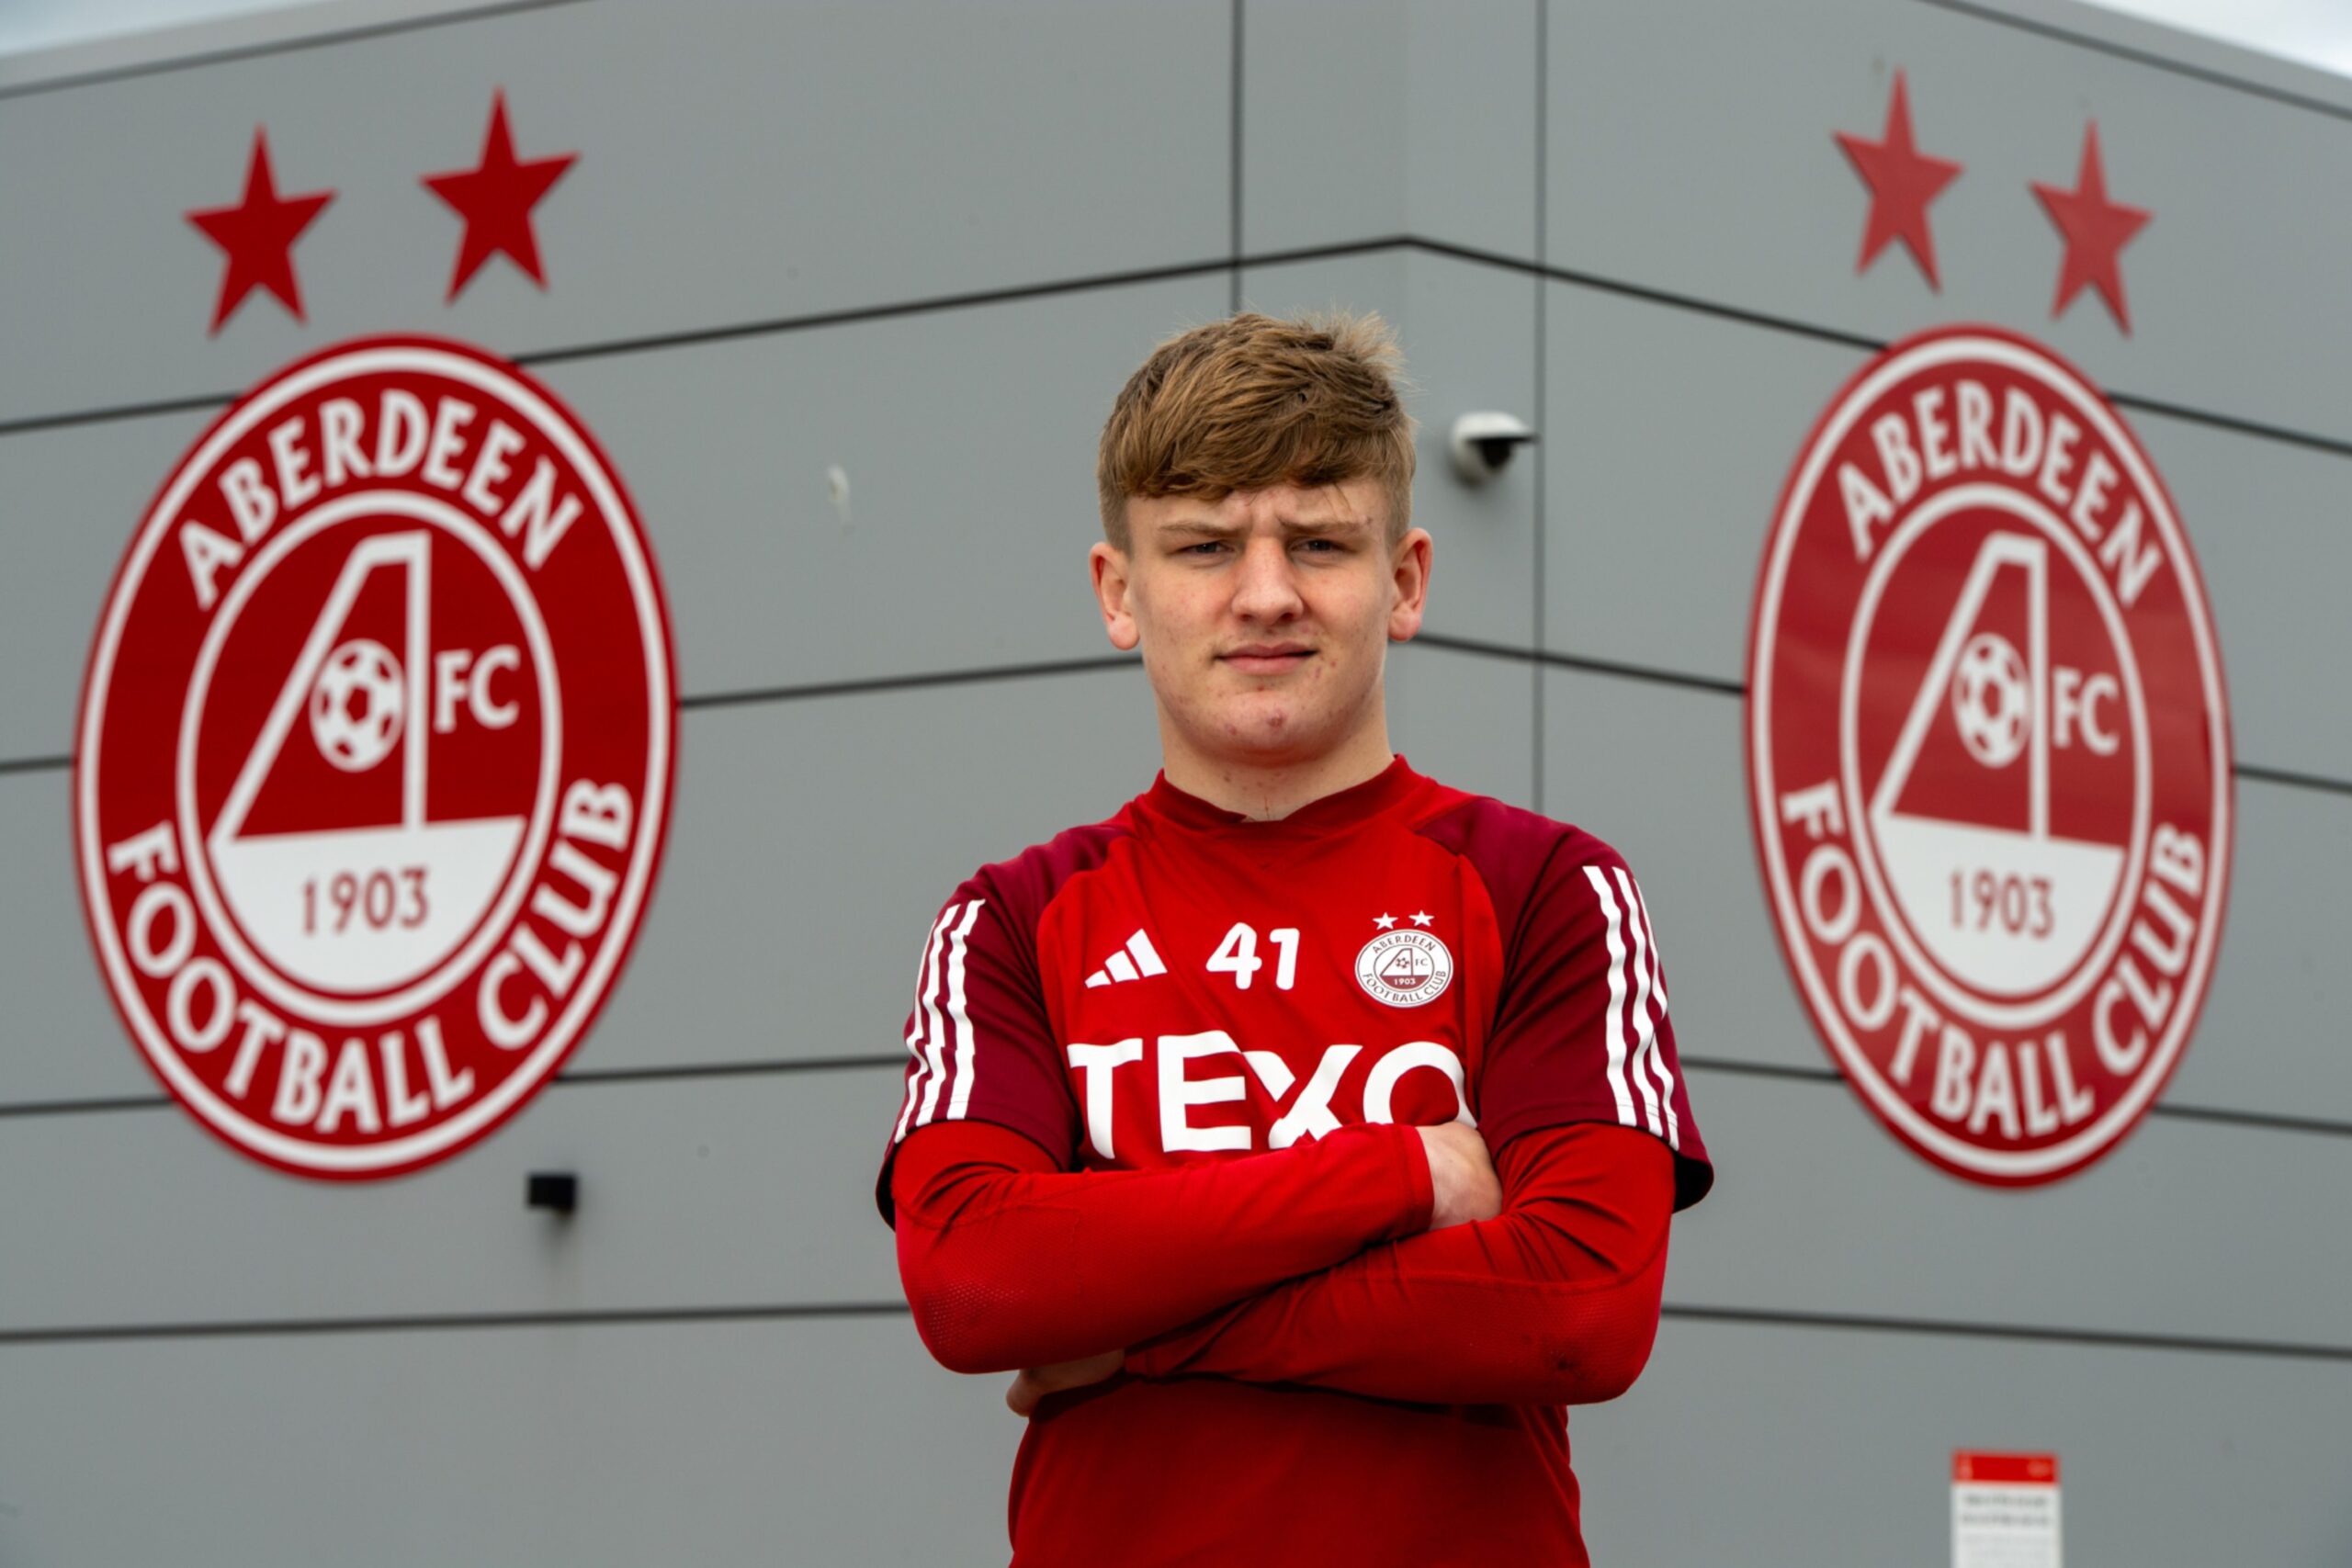 Aberdeen FC youth player Alfie Stewart ahead of the Scottish Youth Cup final at Hampden. Image: Kenny Elrick/DC Thomson